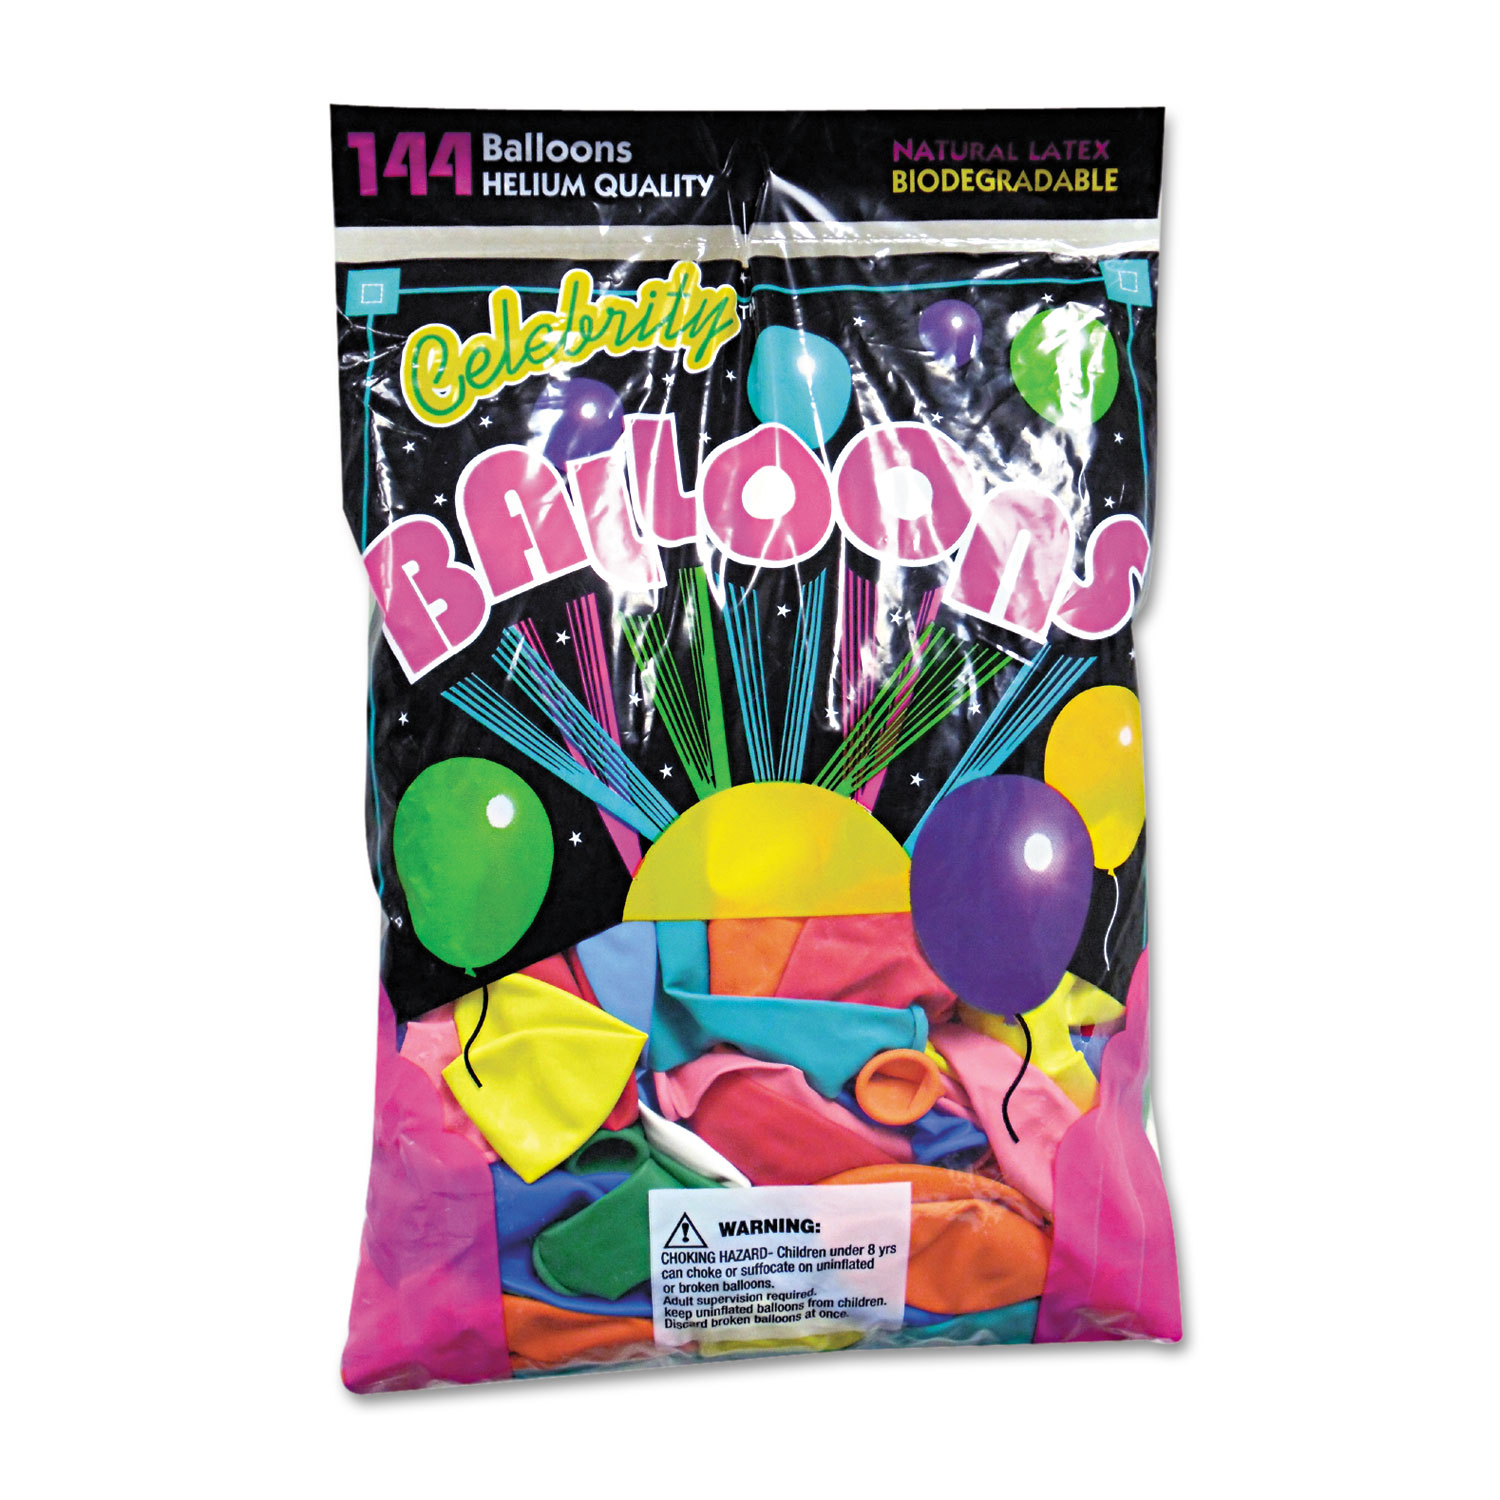  Tablemate 1200 Helium Quality Latex Balloons, 12 Assorted Colors, 144/Pack (TBL1200) 